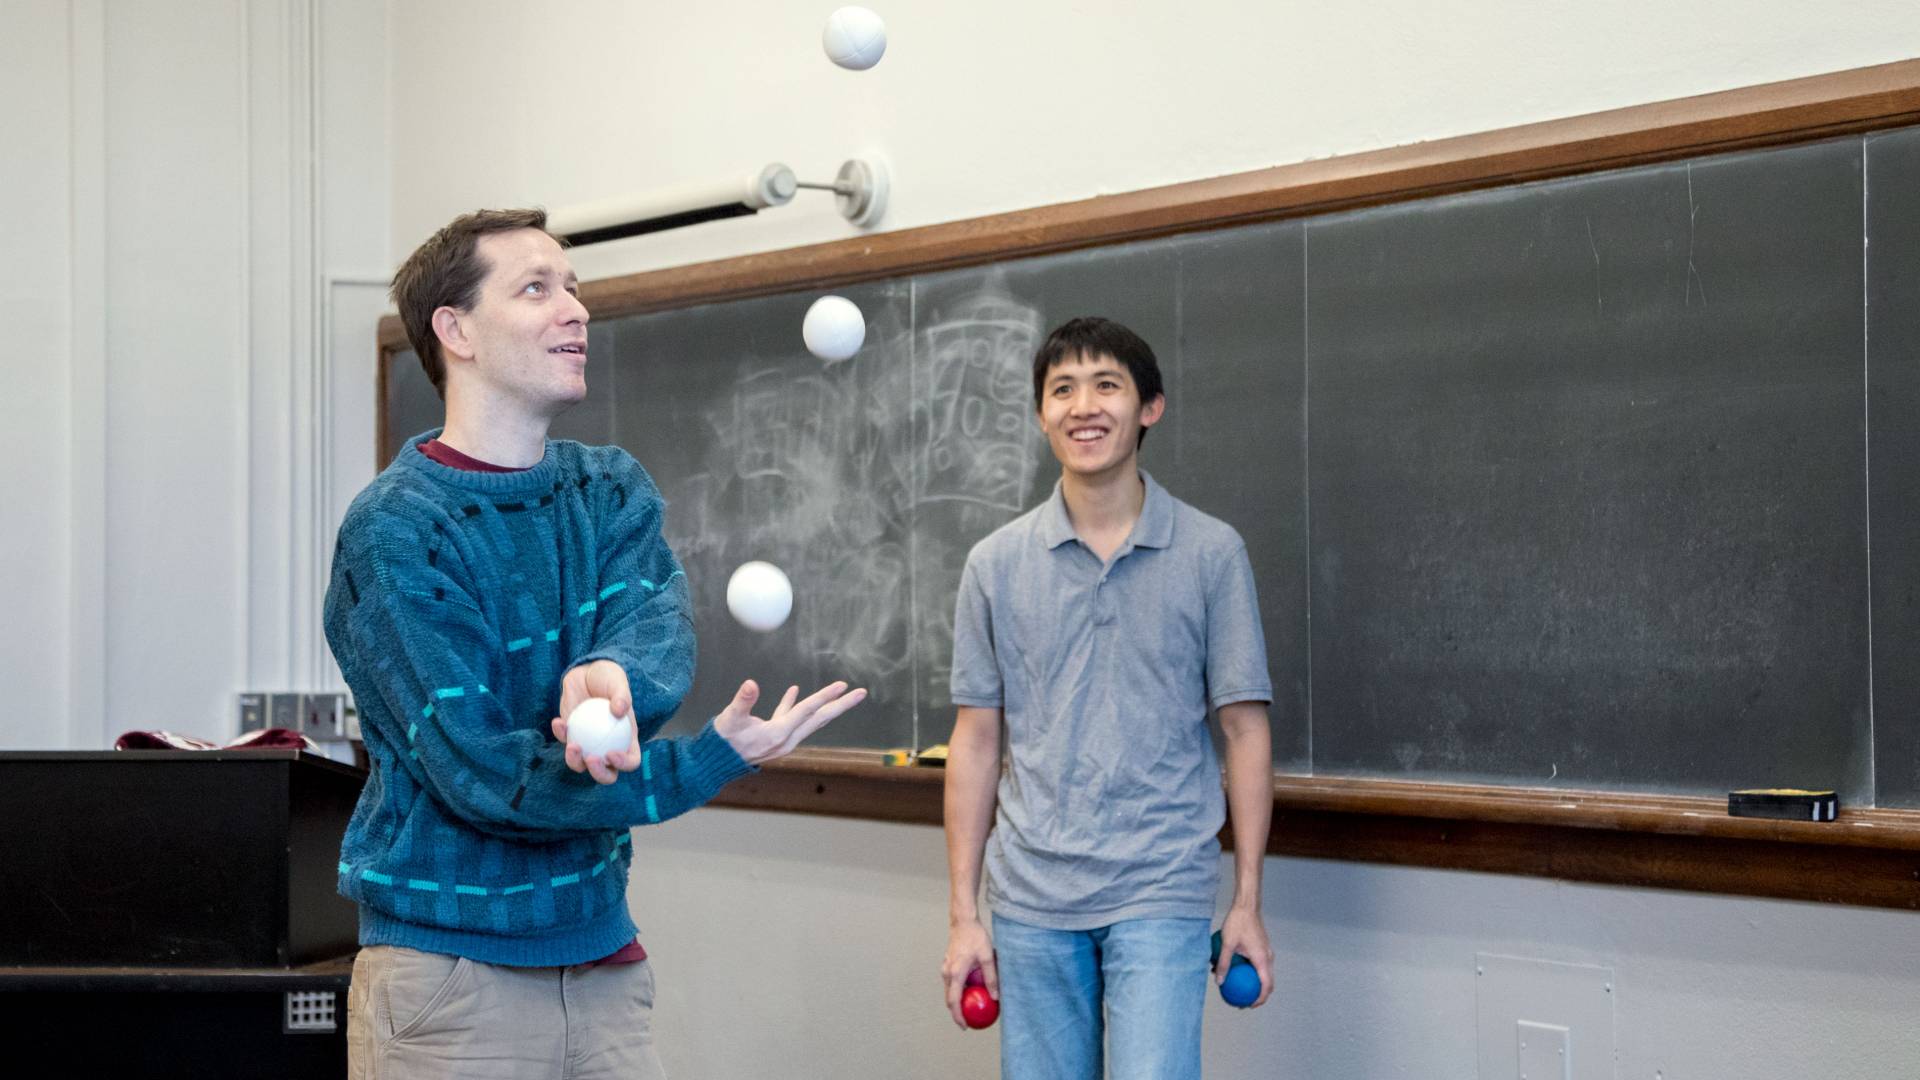 Students juggling in classroom